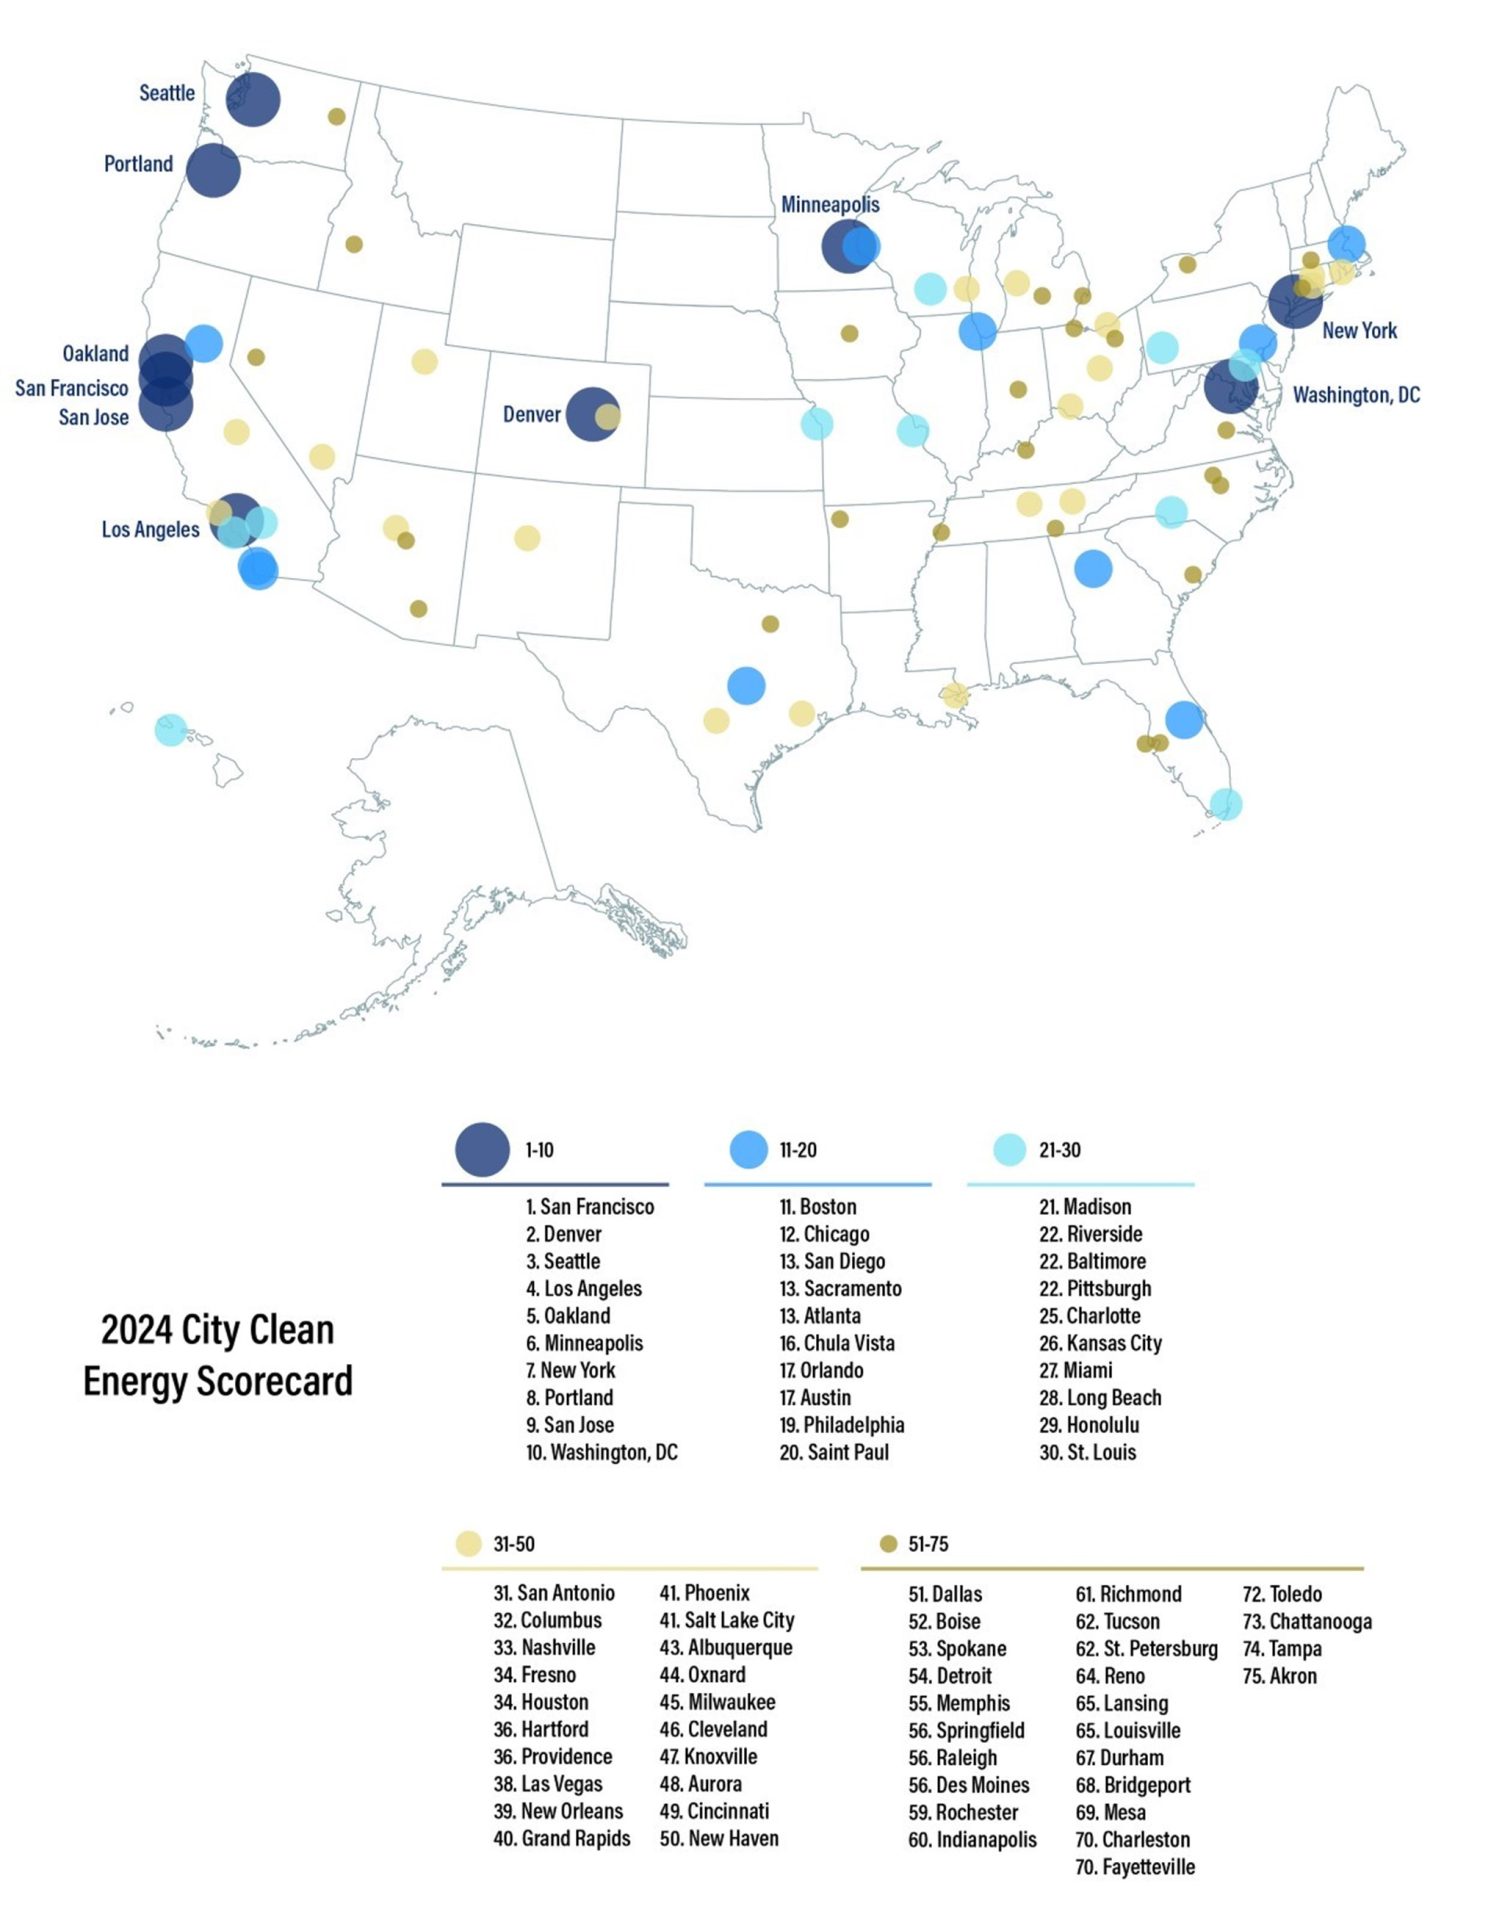 2024 City Clean Energy Scorecard Map shows the how cities are ranked